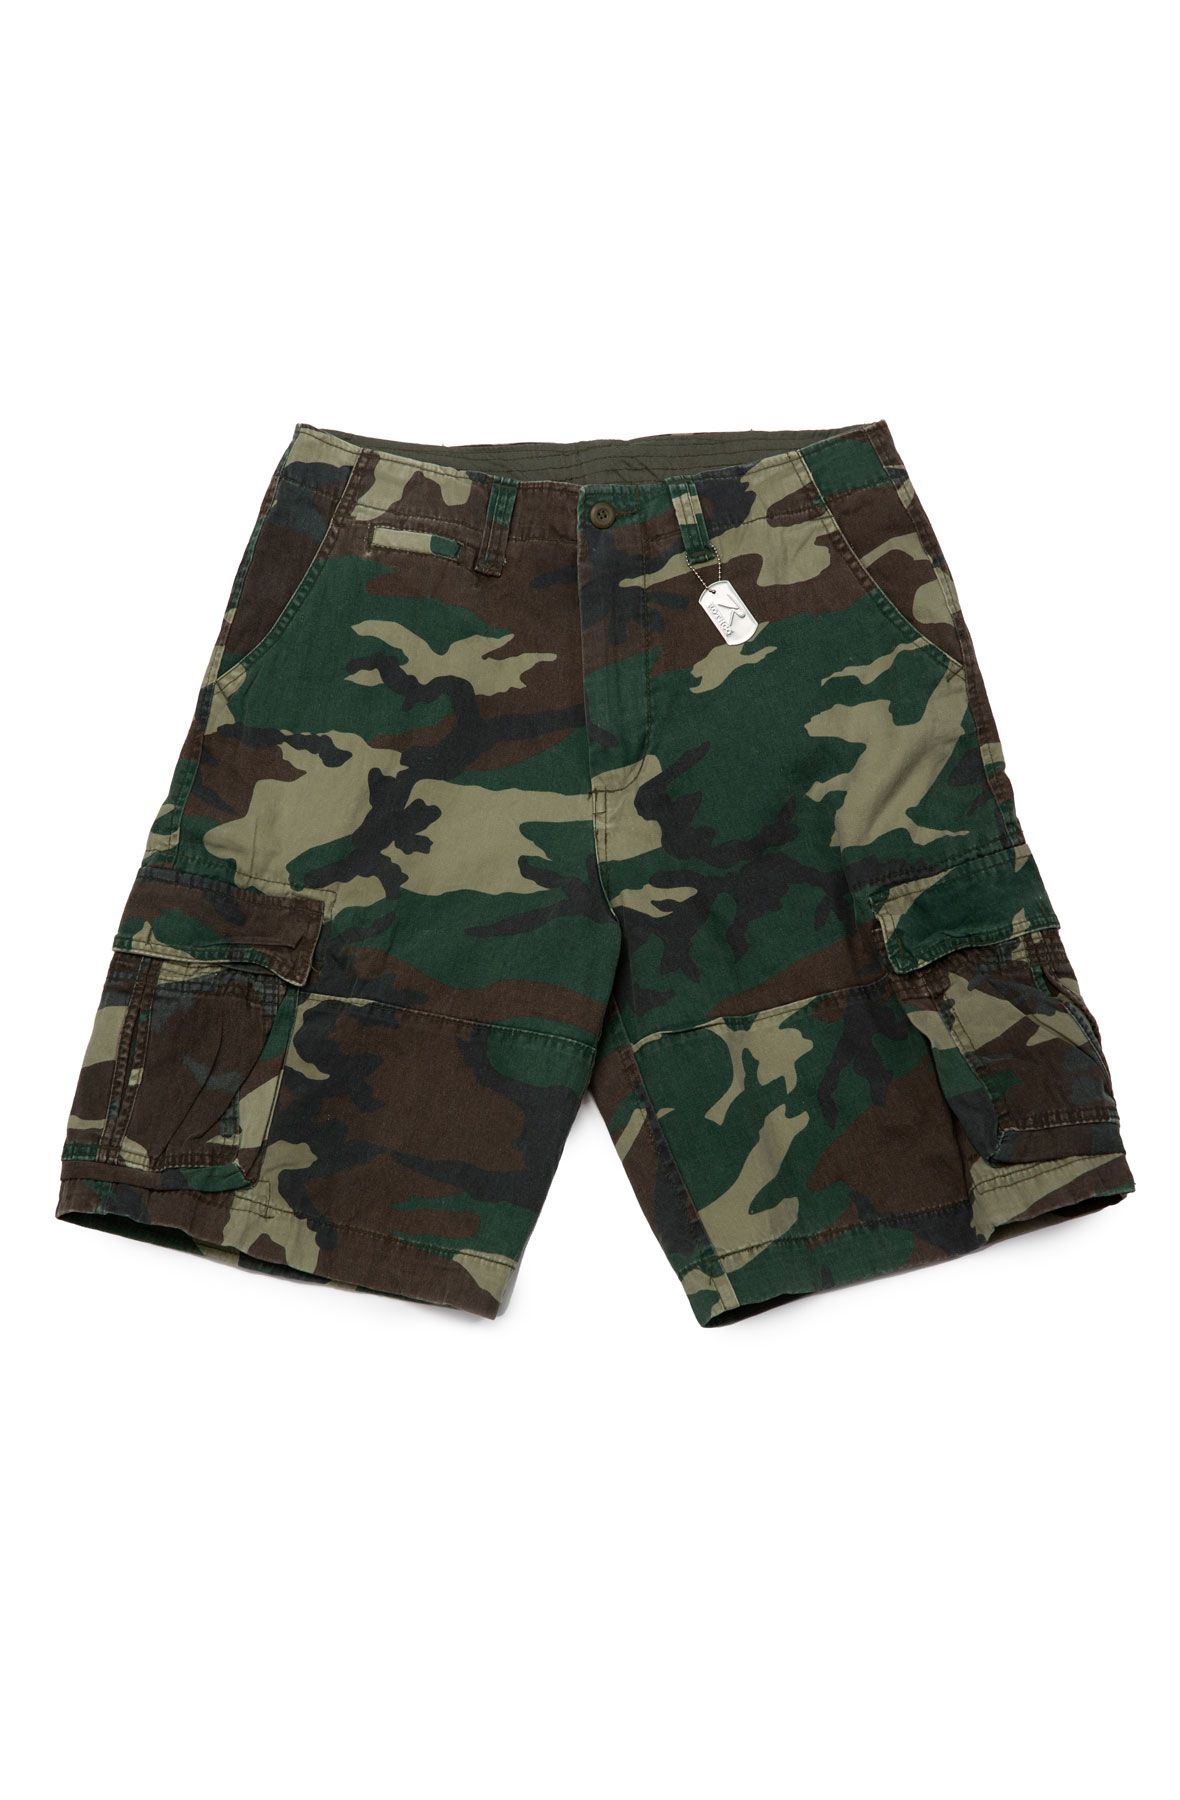 Vintage Camo Infantry Utility Shorts in Woodland Camo